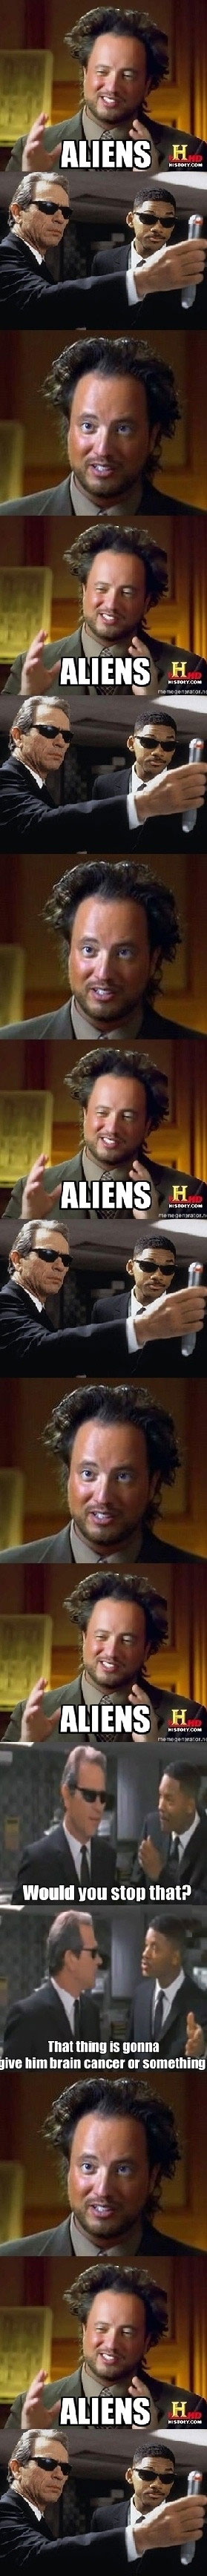 When MIB meets the aliens guy